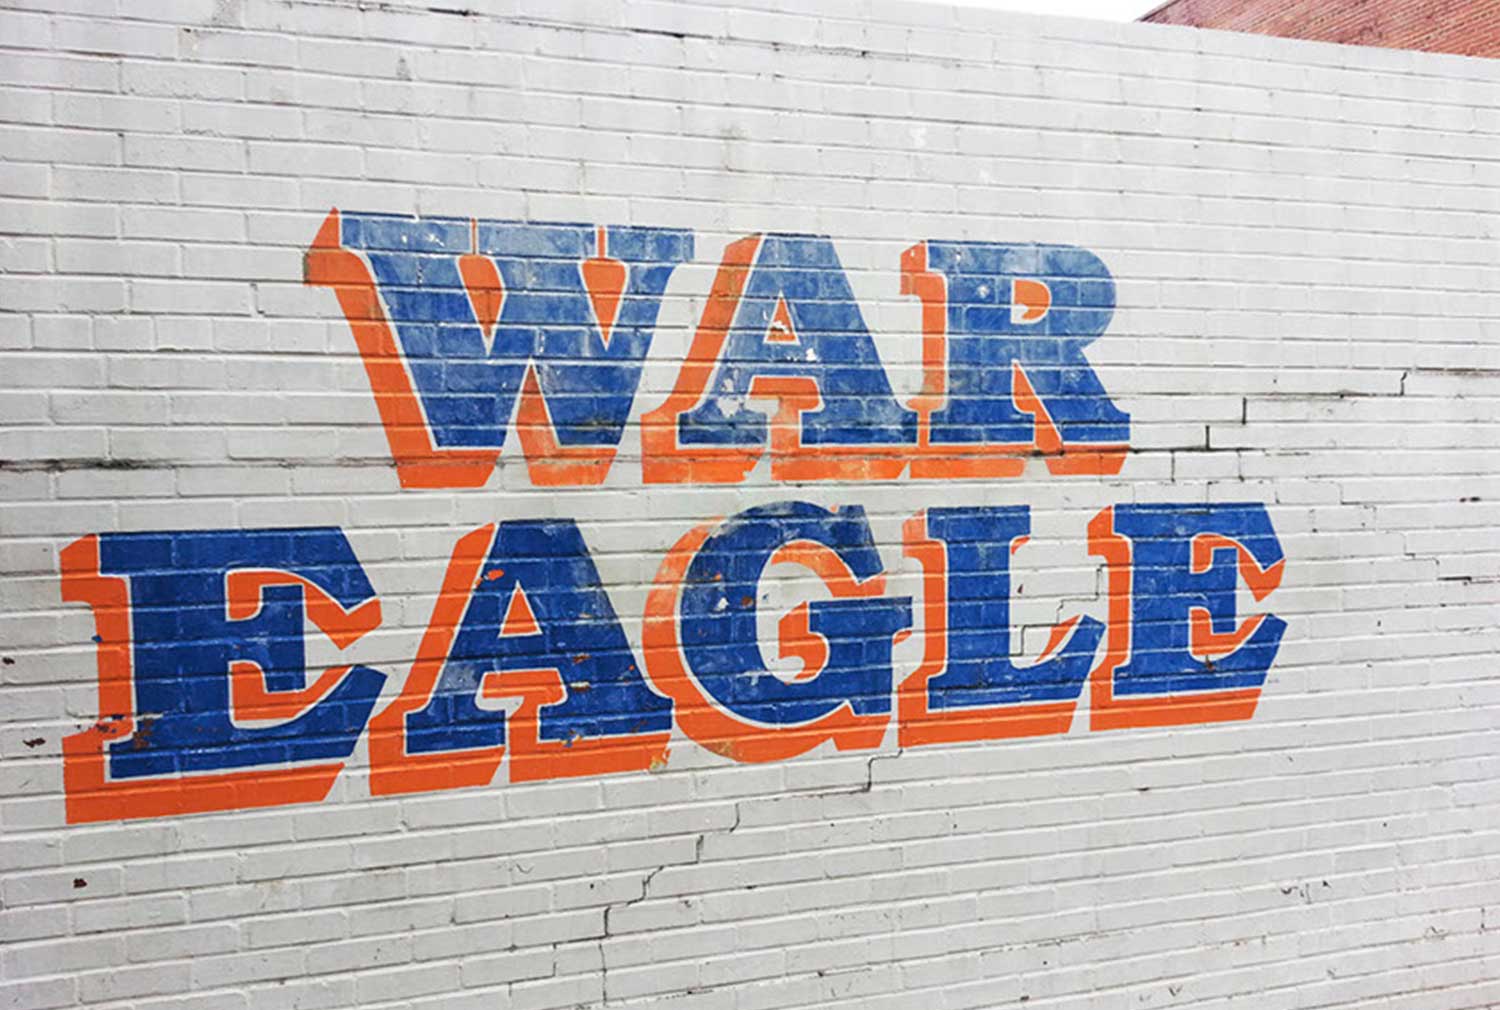 A white brick all with the words War Eagle